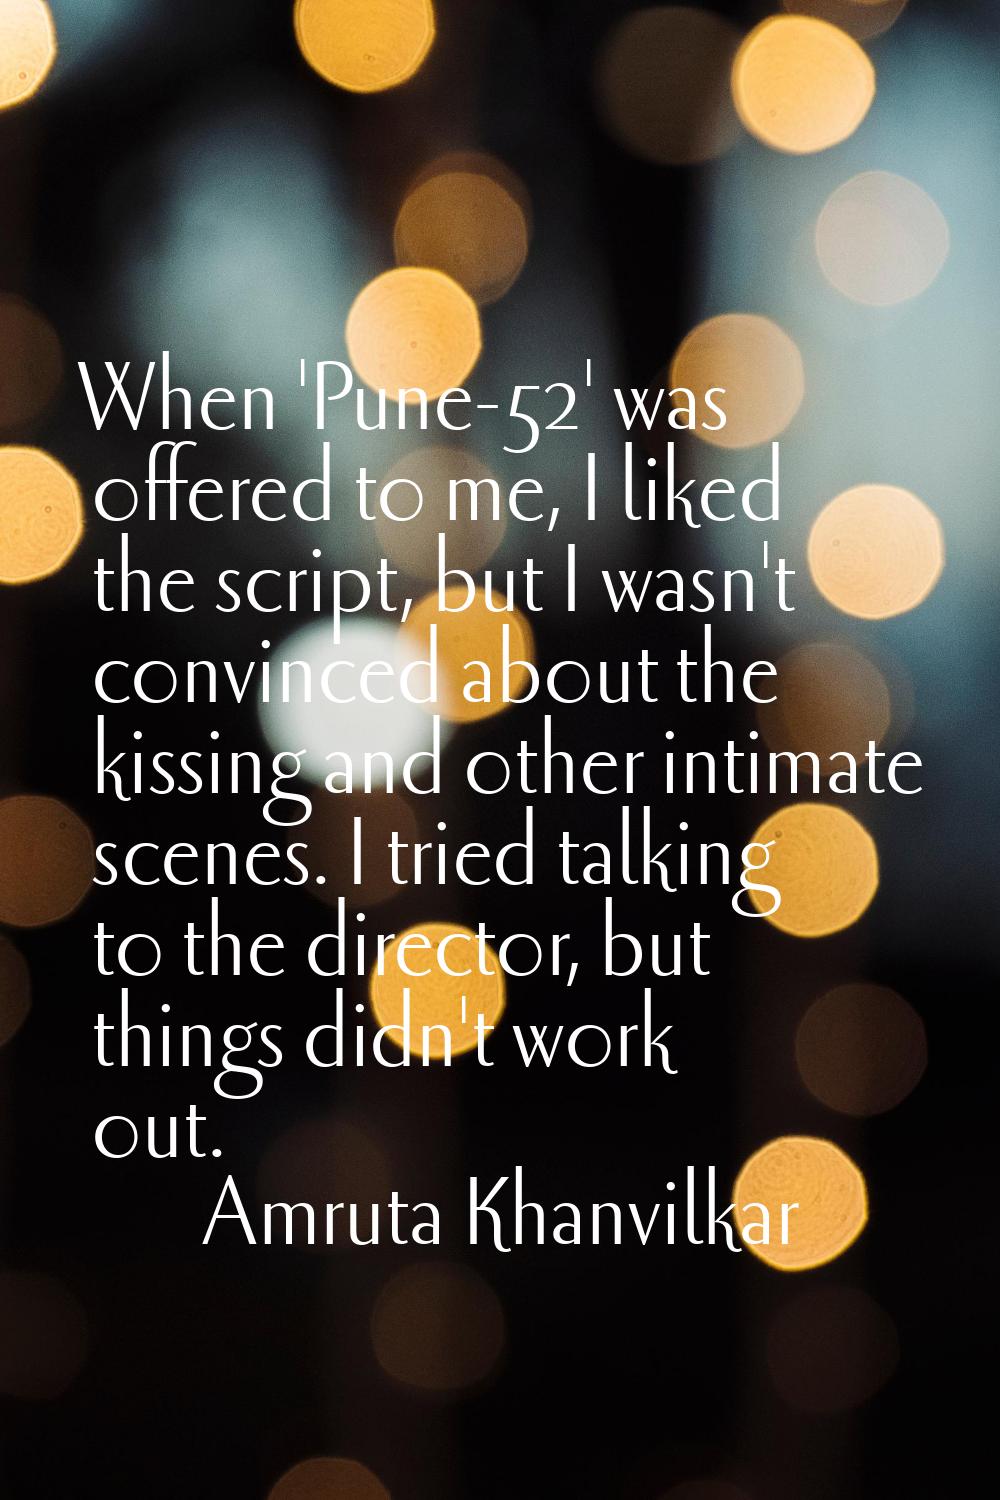 When 'Pune-52' was offered to me, I liked the script, but I wasn't convinced about the kissing and 